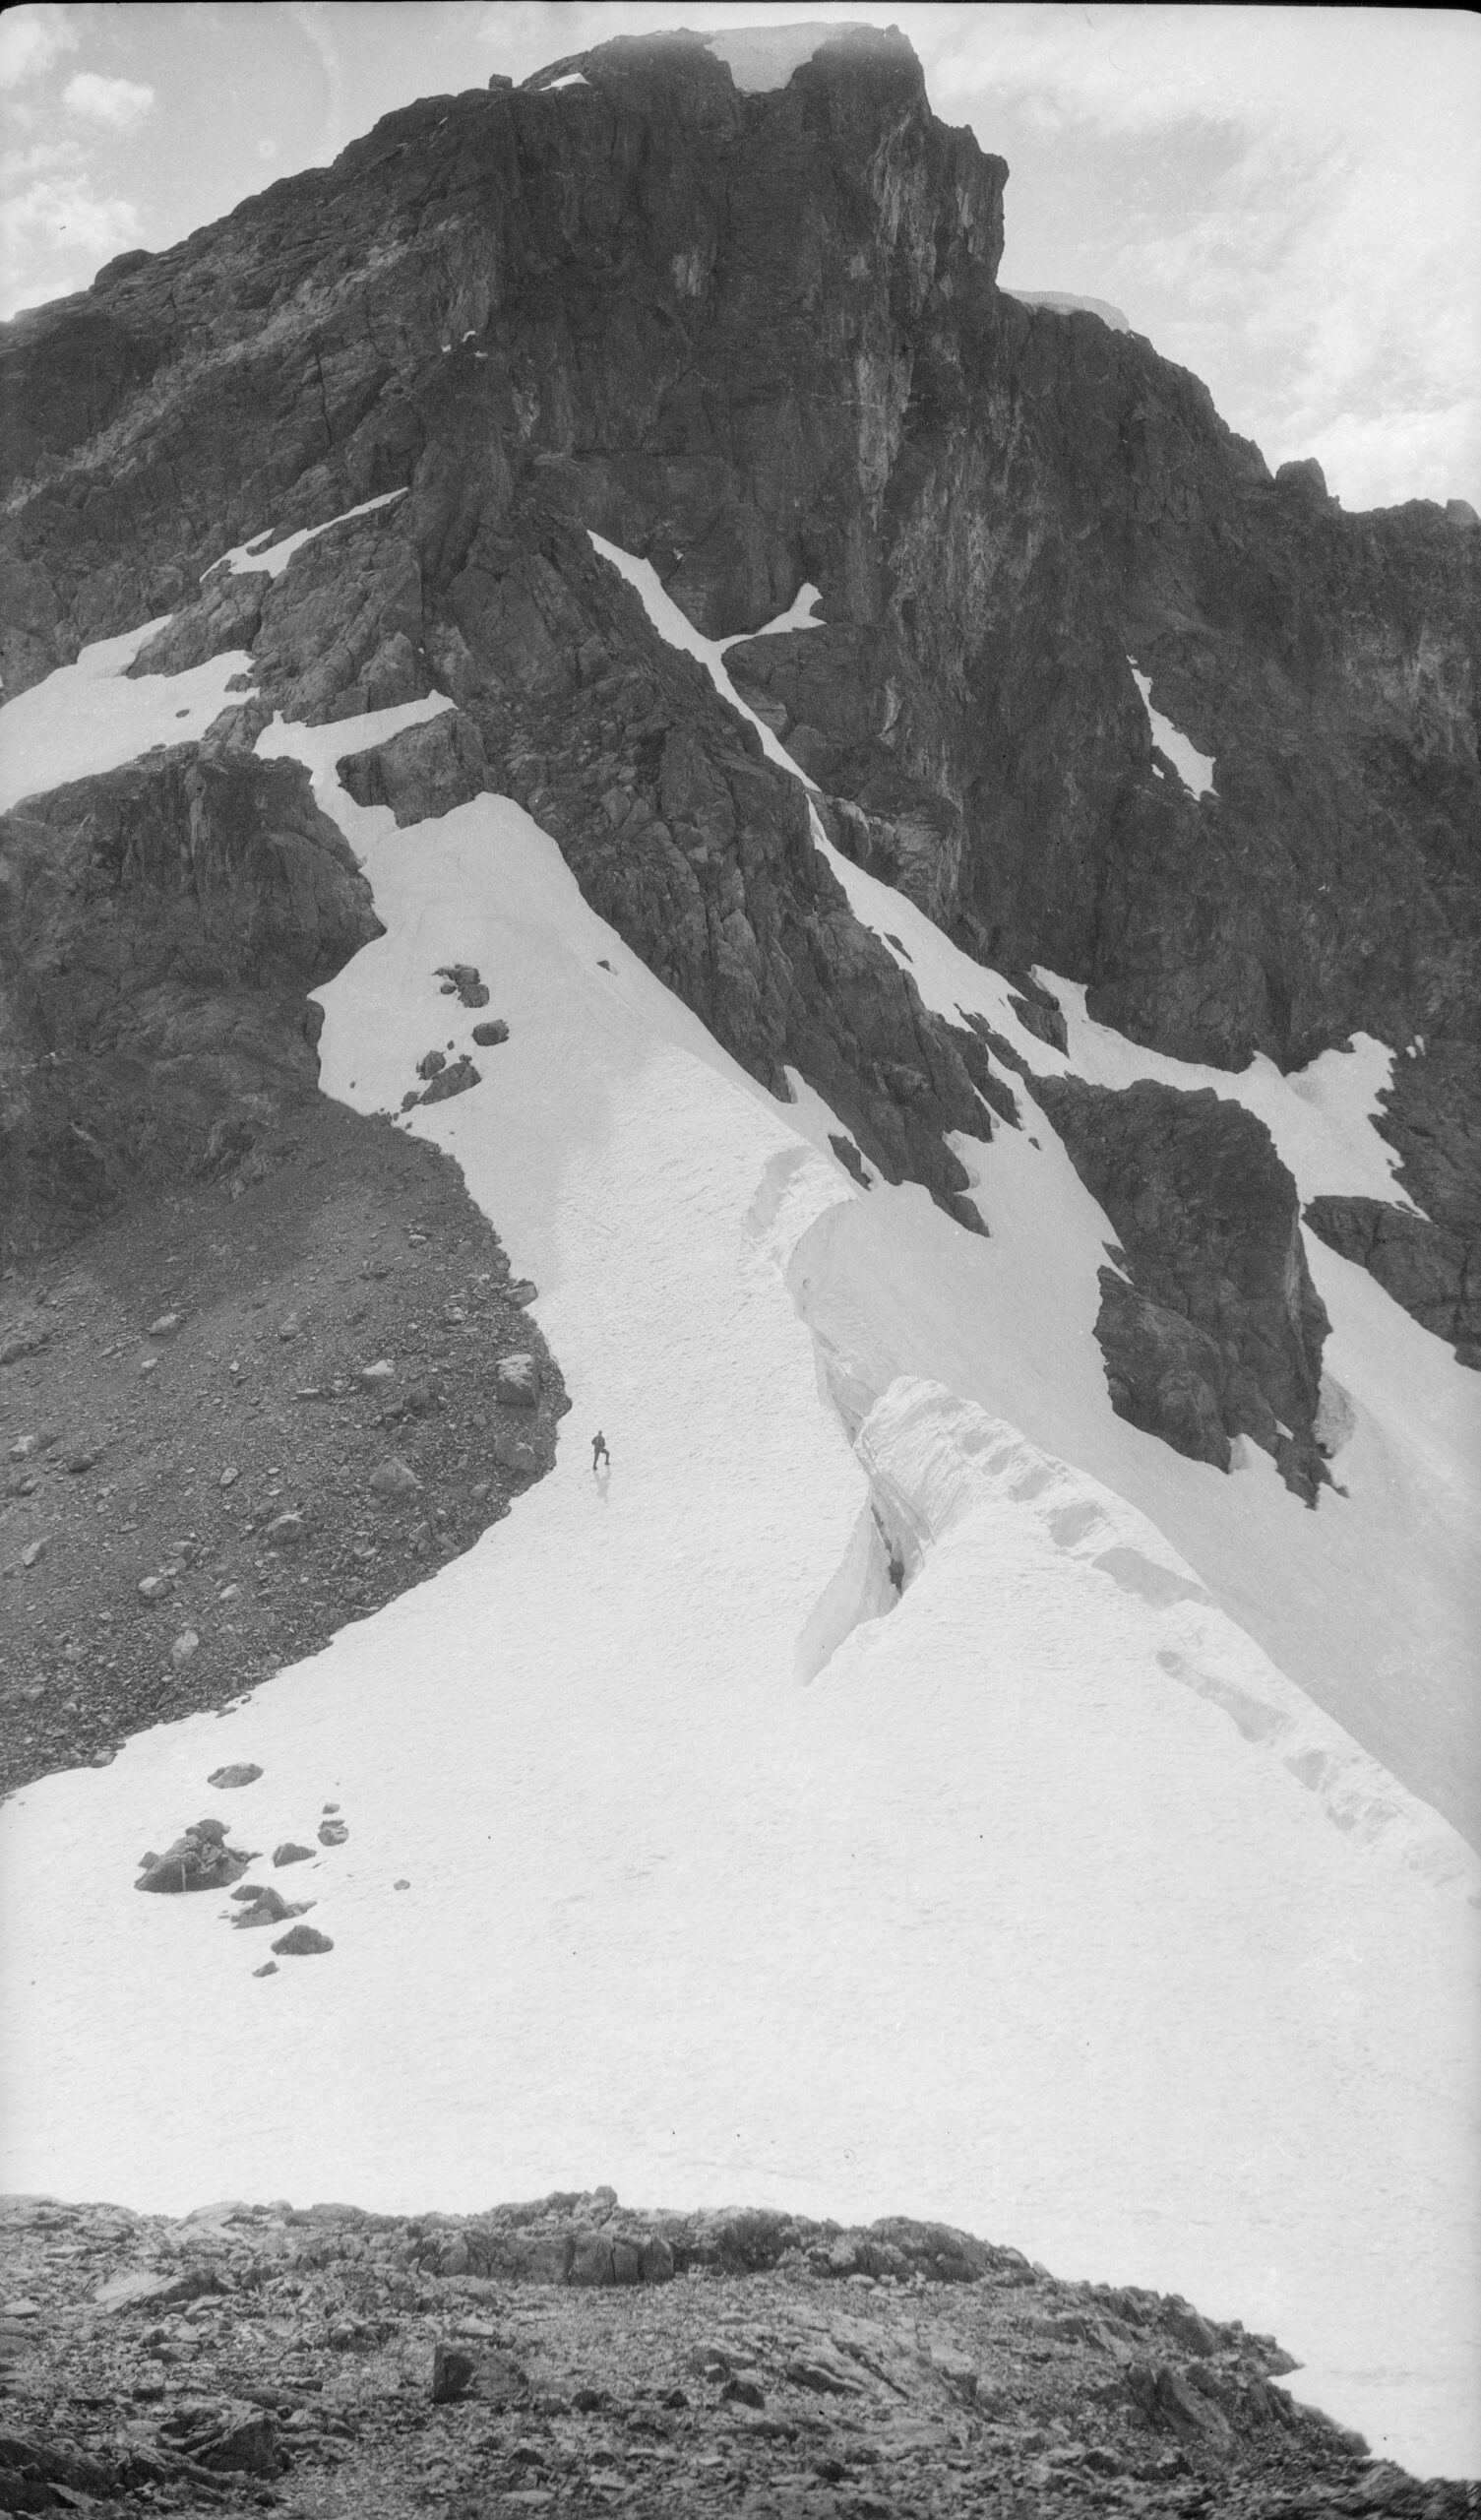 Can you spot the mountaineer? Photographed between 1927-1931. Reference code: AM494-S10-: 2005-040.606